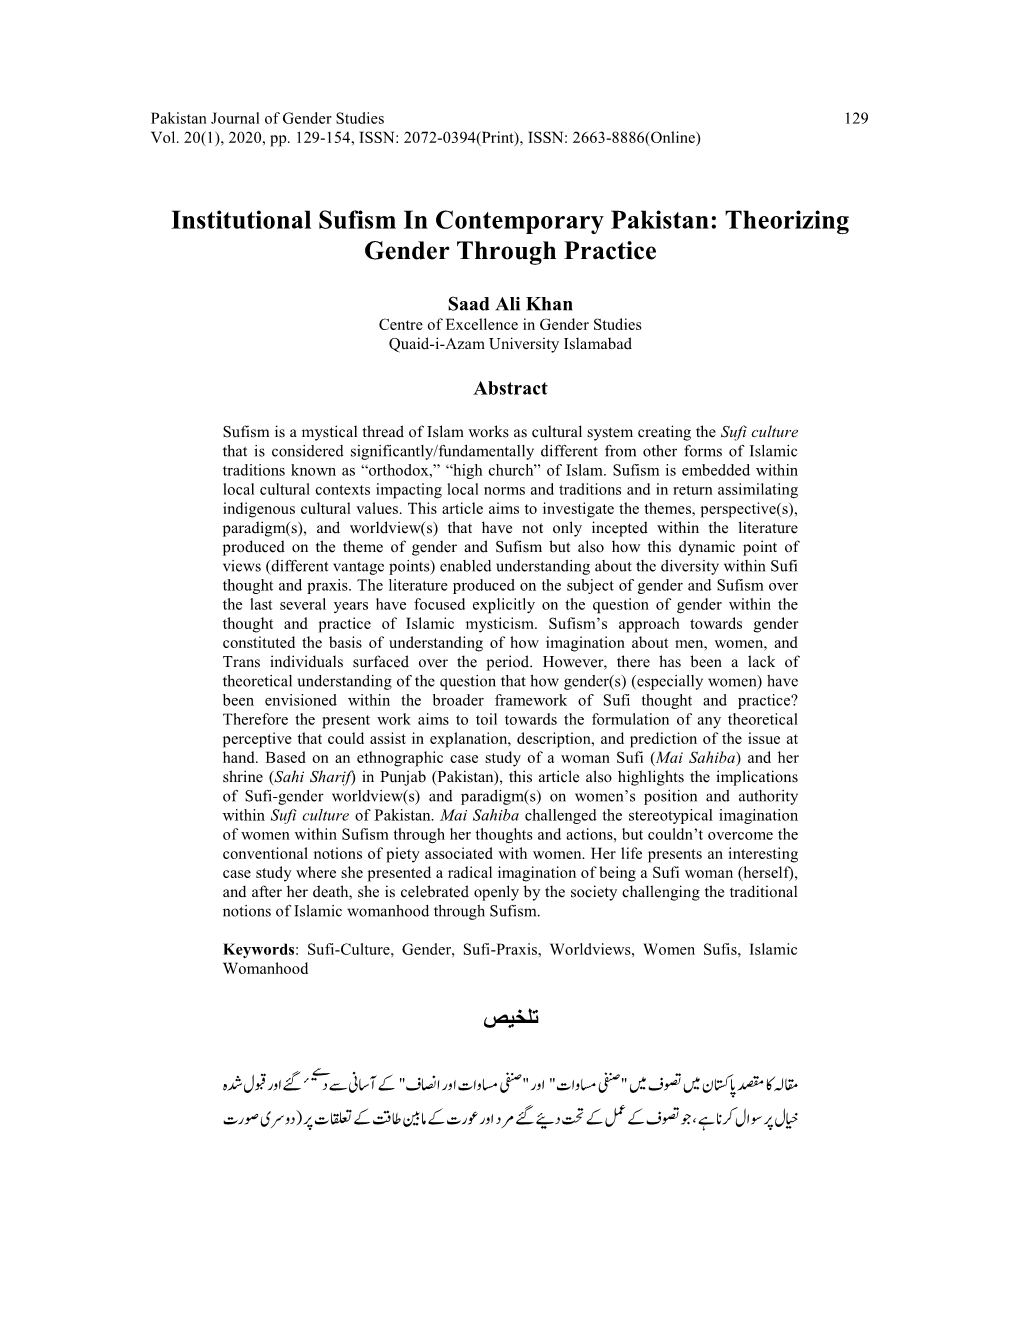 Institutional Sufism in Contemporary Pakistan: Theorizing Gender Through Practice